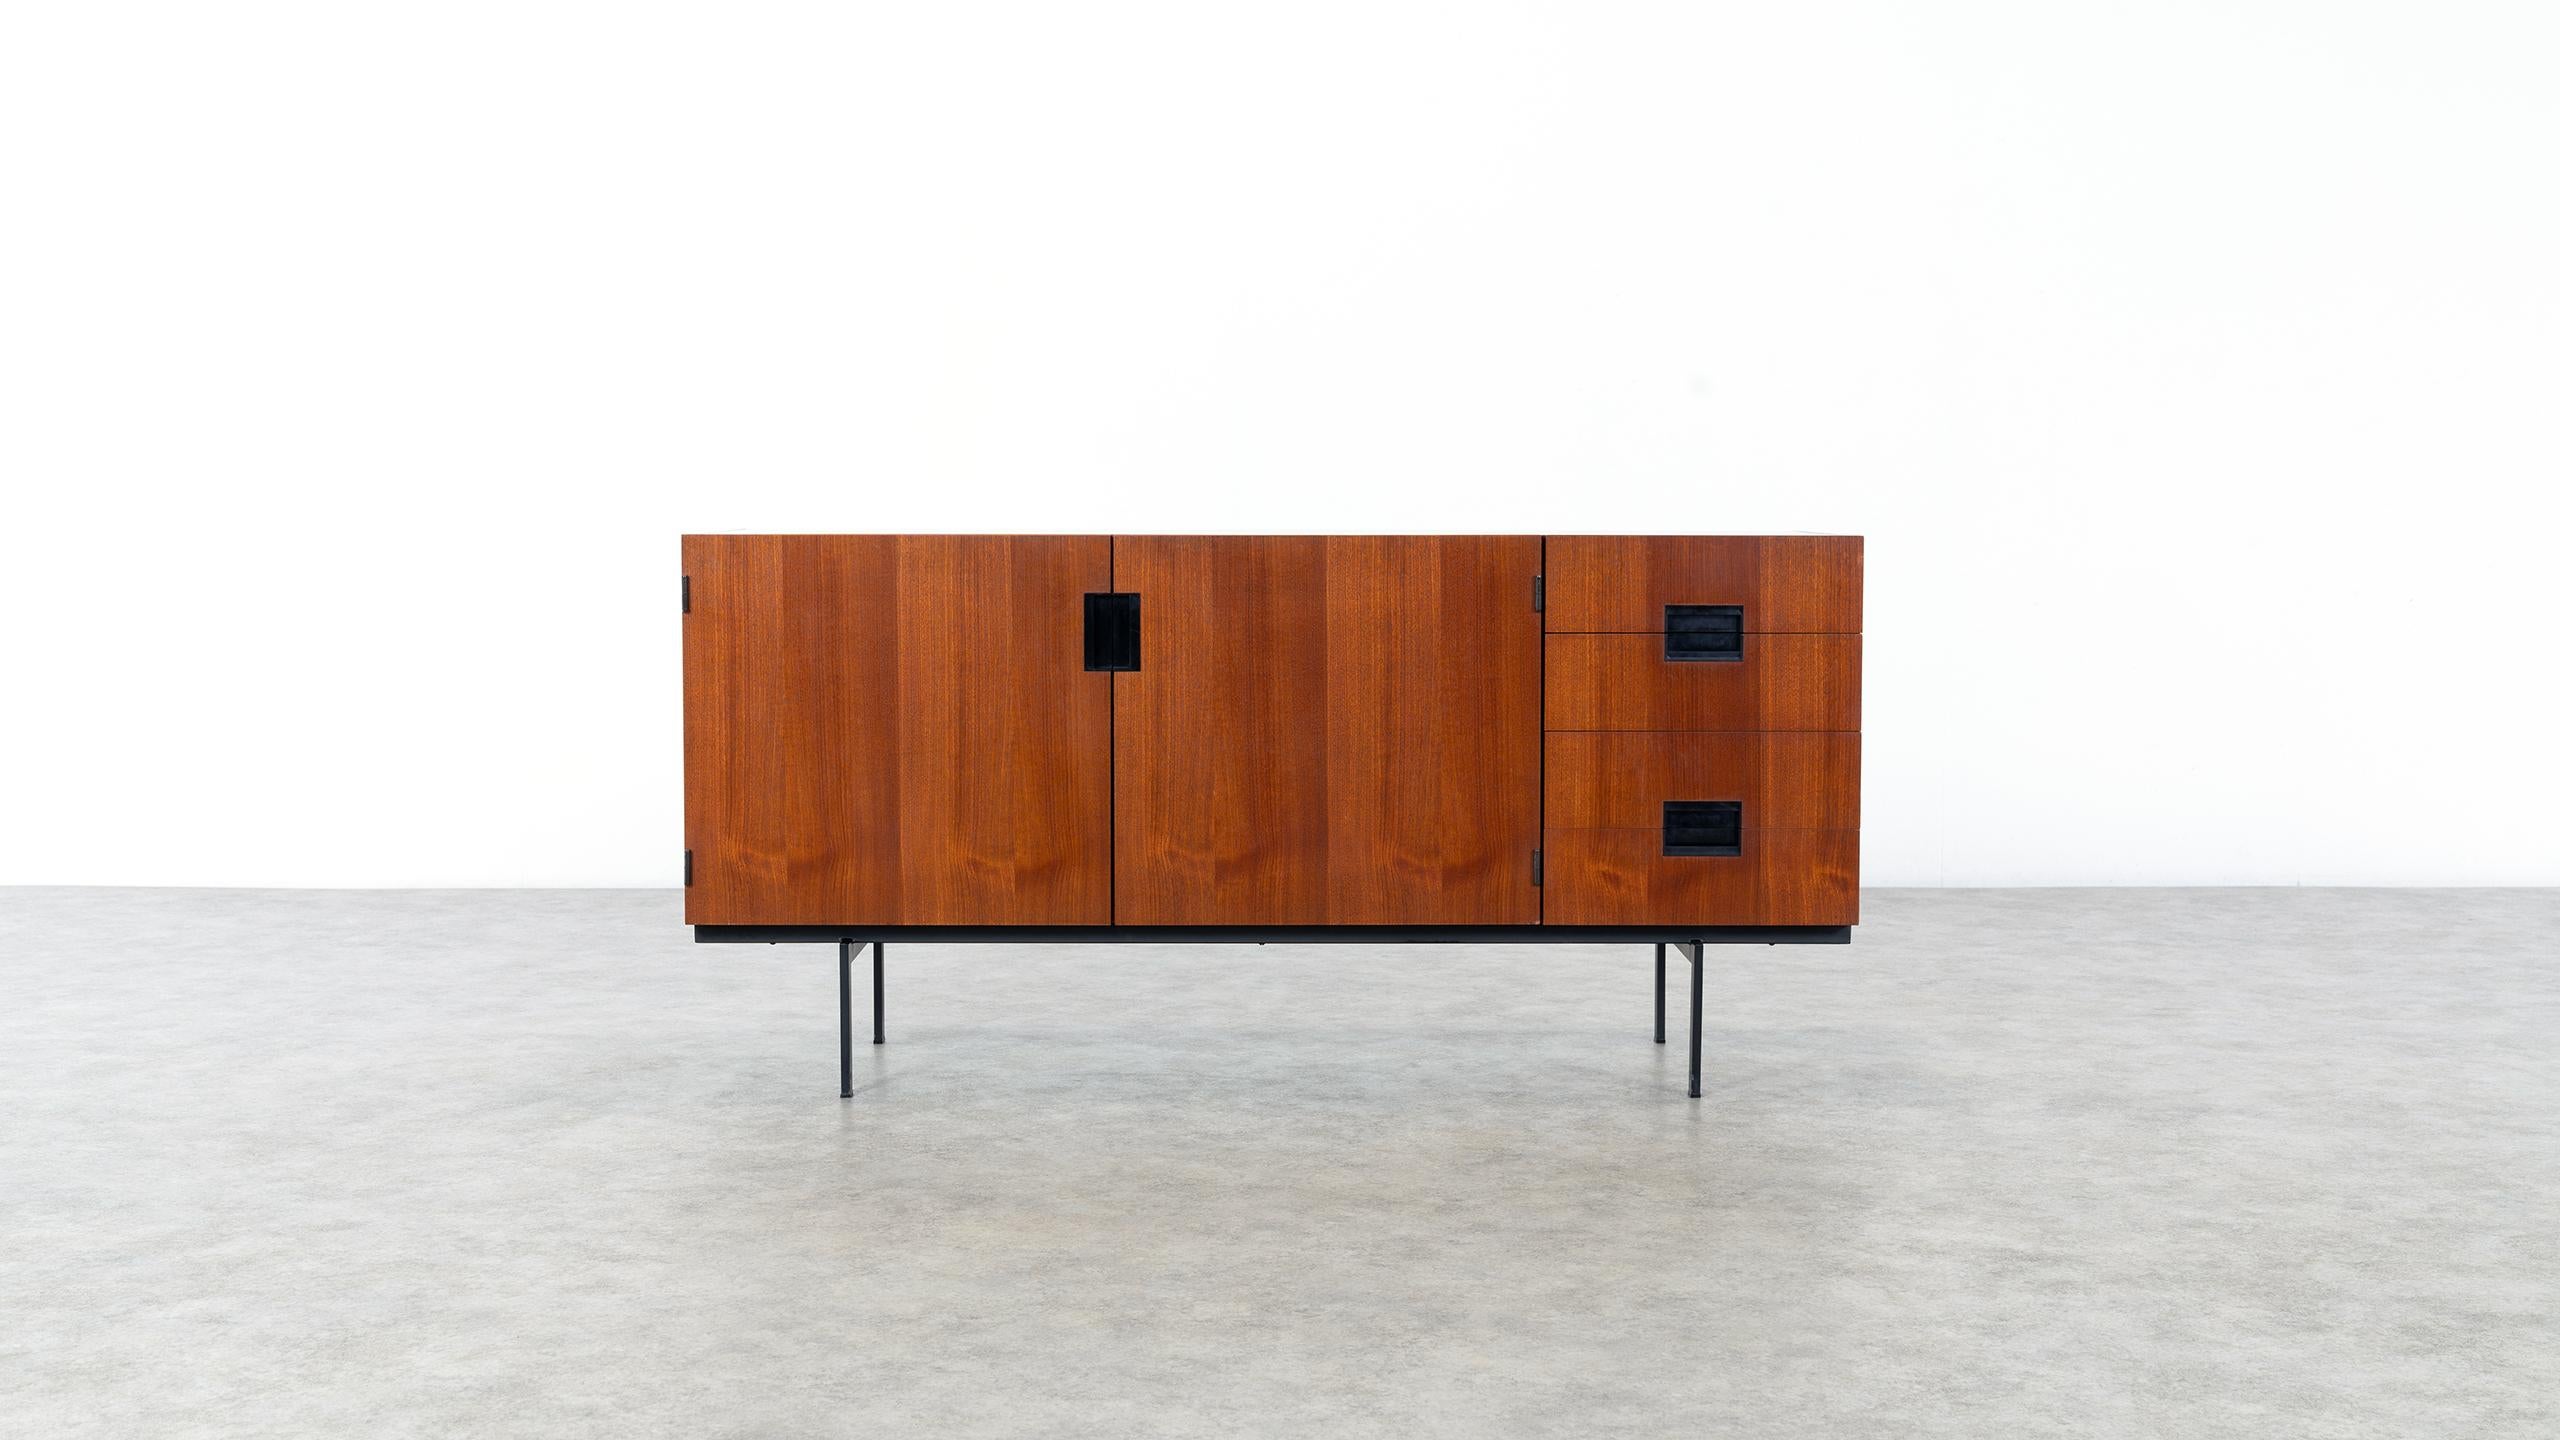 Minimalist sideboard designed by Cees Braakman for Pastoe, the Netherlands, 1958. 

This highly collectable DU-01 sideboard is regarded as a true icon of Dutch midcentury design.
The sideboard has an outstanding clean geometrical design with a